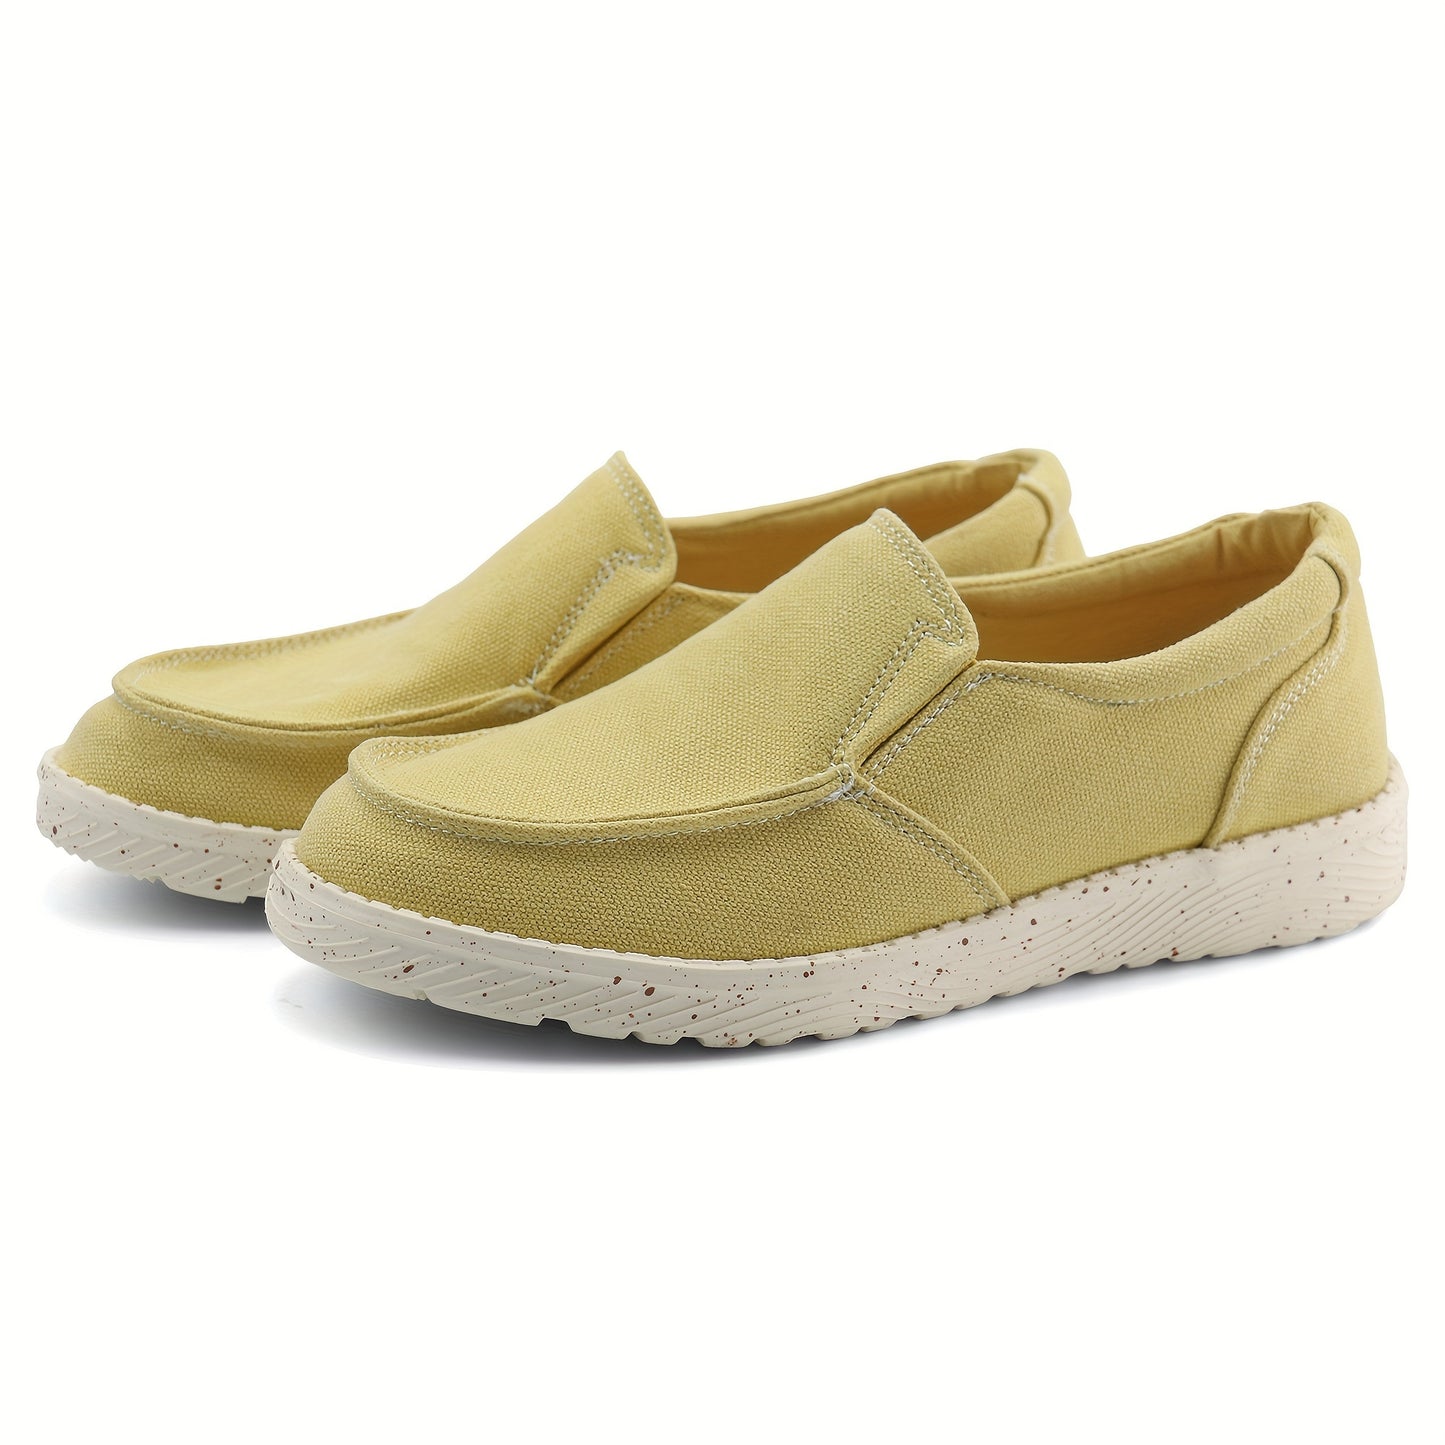 Women's Simple Canvas Shoes, Casual Slip On Outdoor Shoes, Women's Comfortable Low Top Shoes